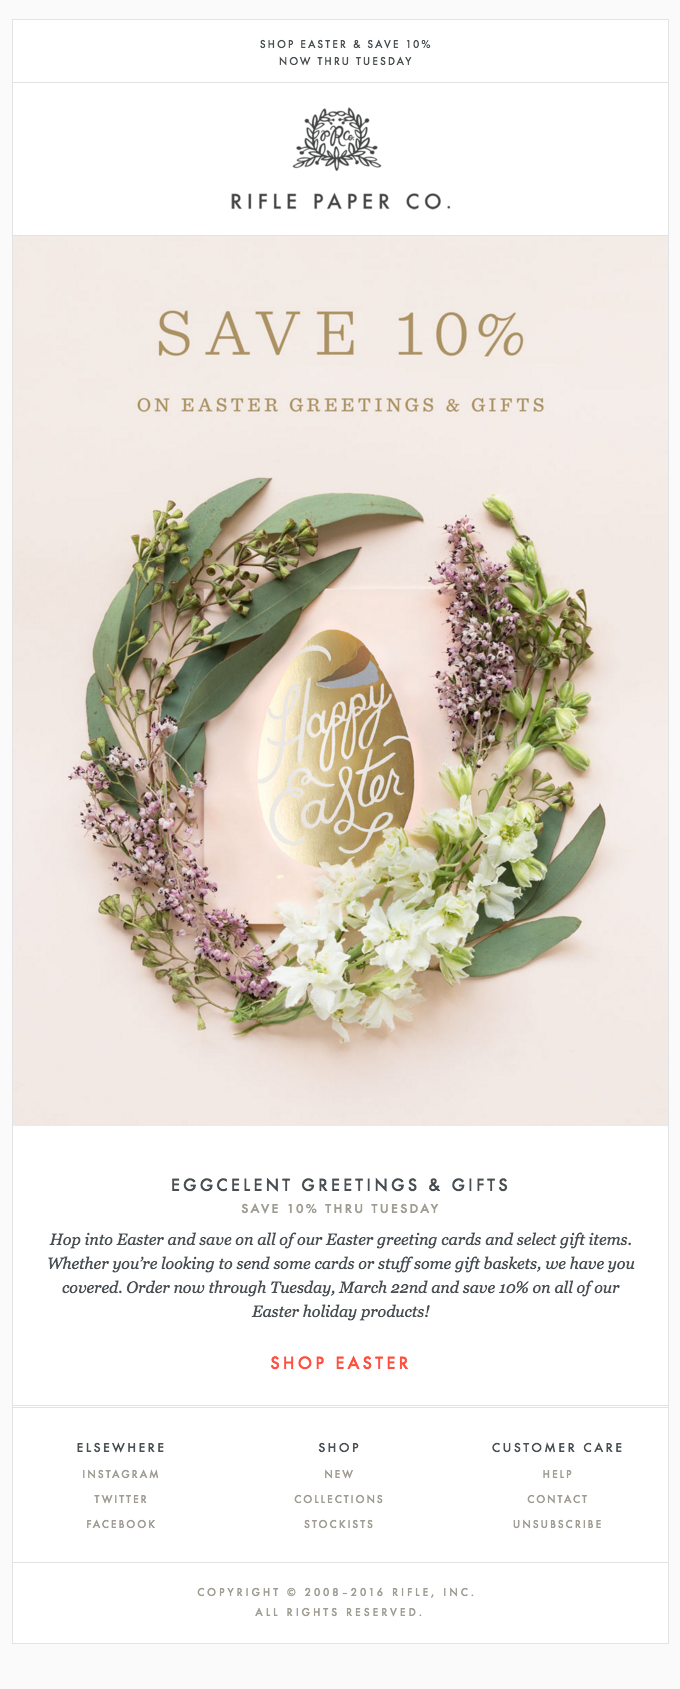 Eggcelent Greetings & Gifts for Easter